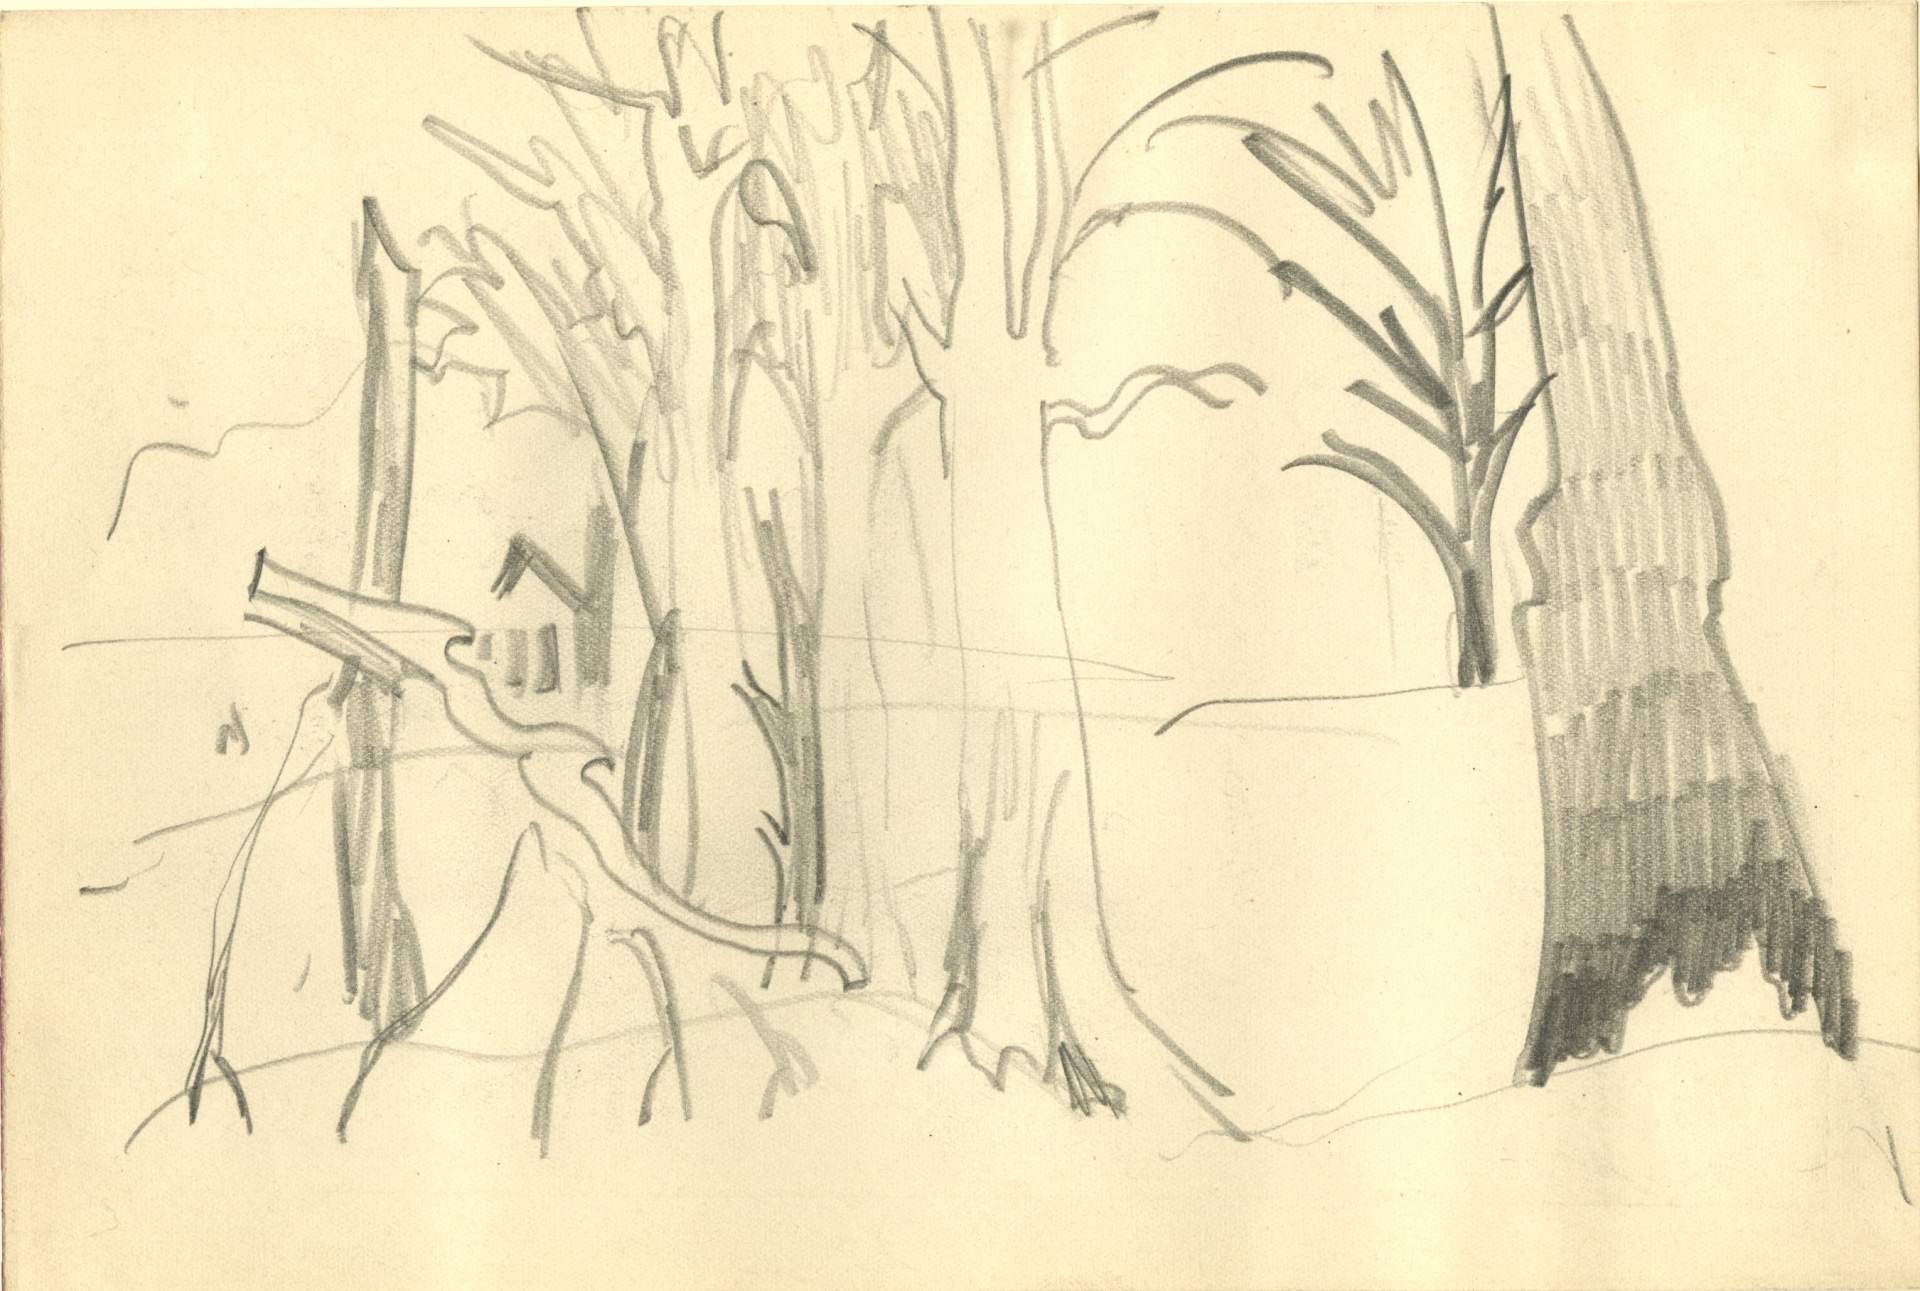 Sketch with broken branches, trees, and house